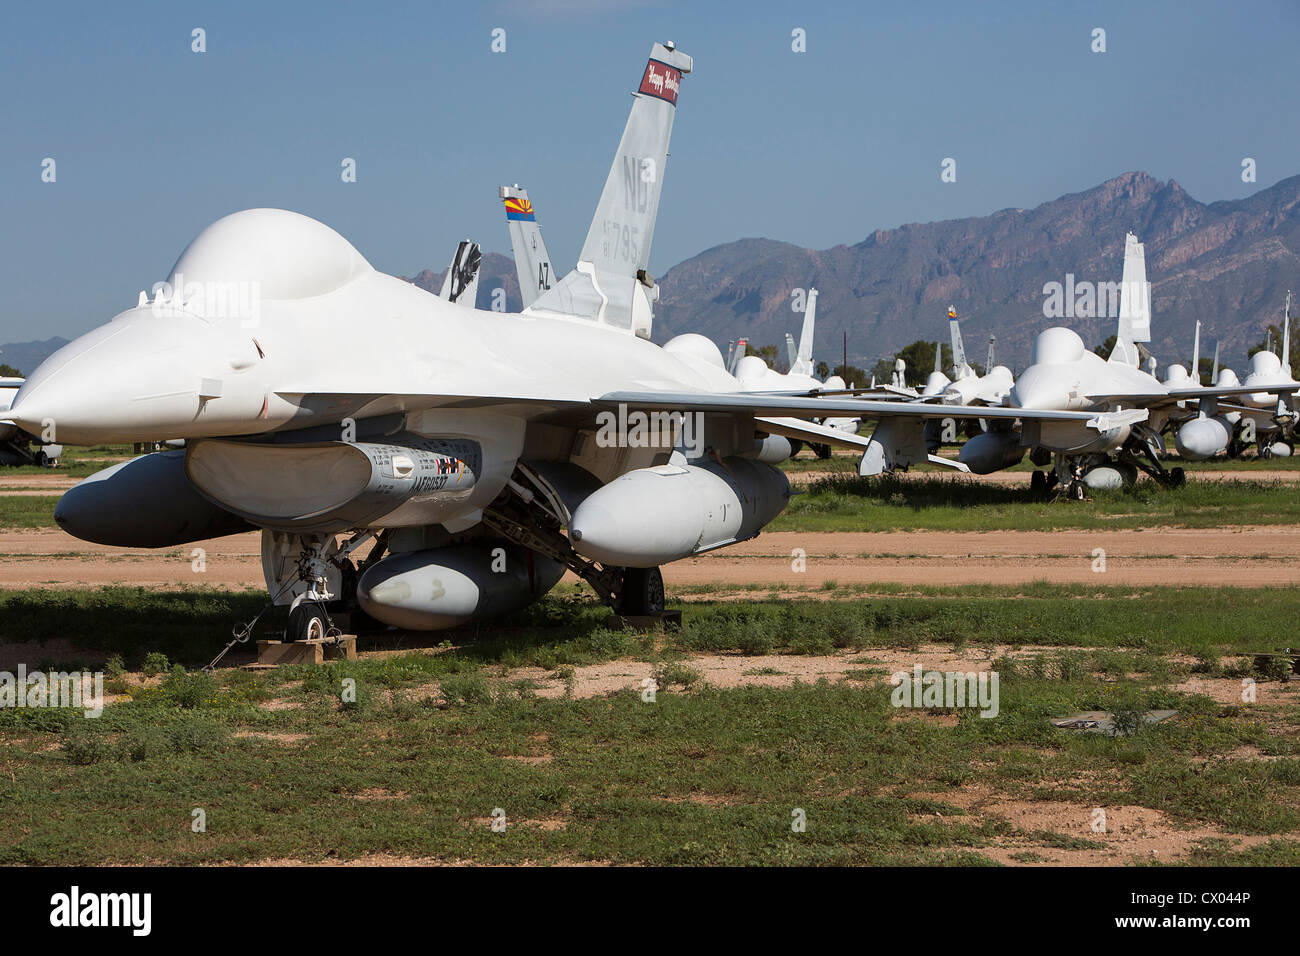 F-16 Fighting Falcon aircraft in storage at the 309th Aerospace Maintenance and Regeneration Group at Davis-Monthan AFB. Stock Photo